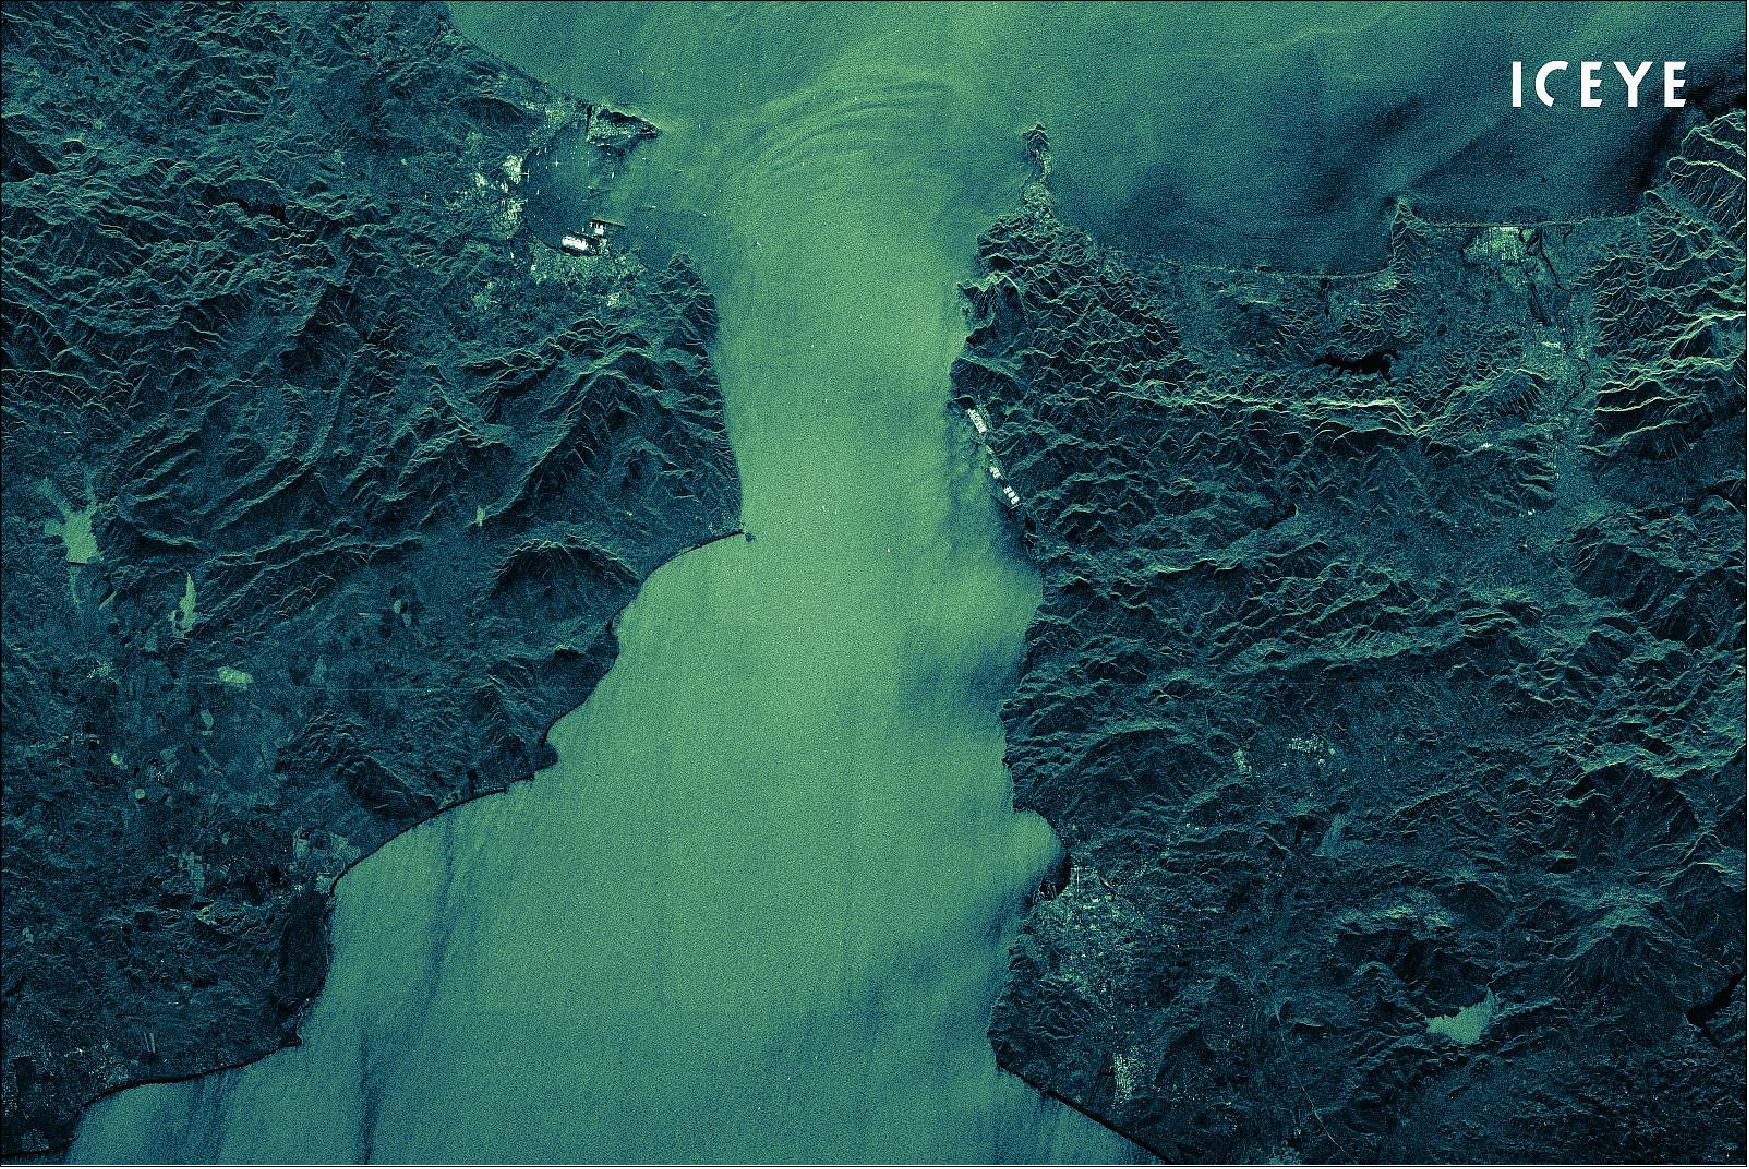 Figure 29: A wide area ICEYE radar satellite image of the Strait of Gibraltar (image credit: ICEYE)